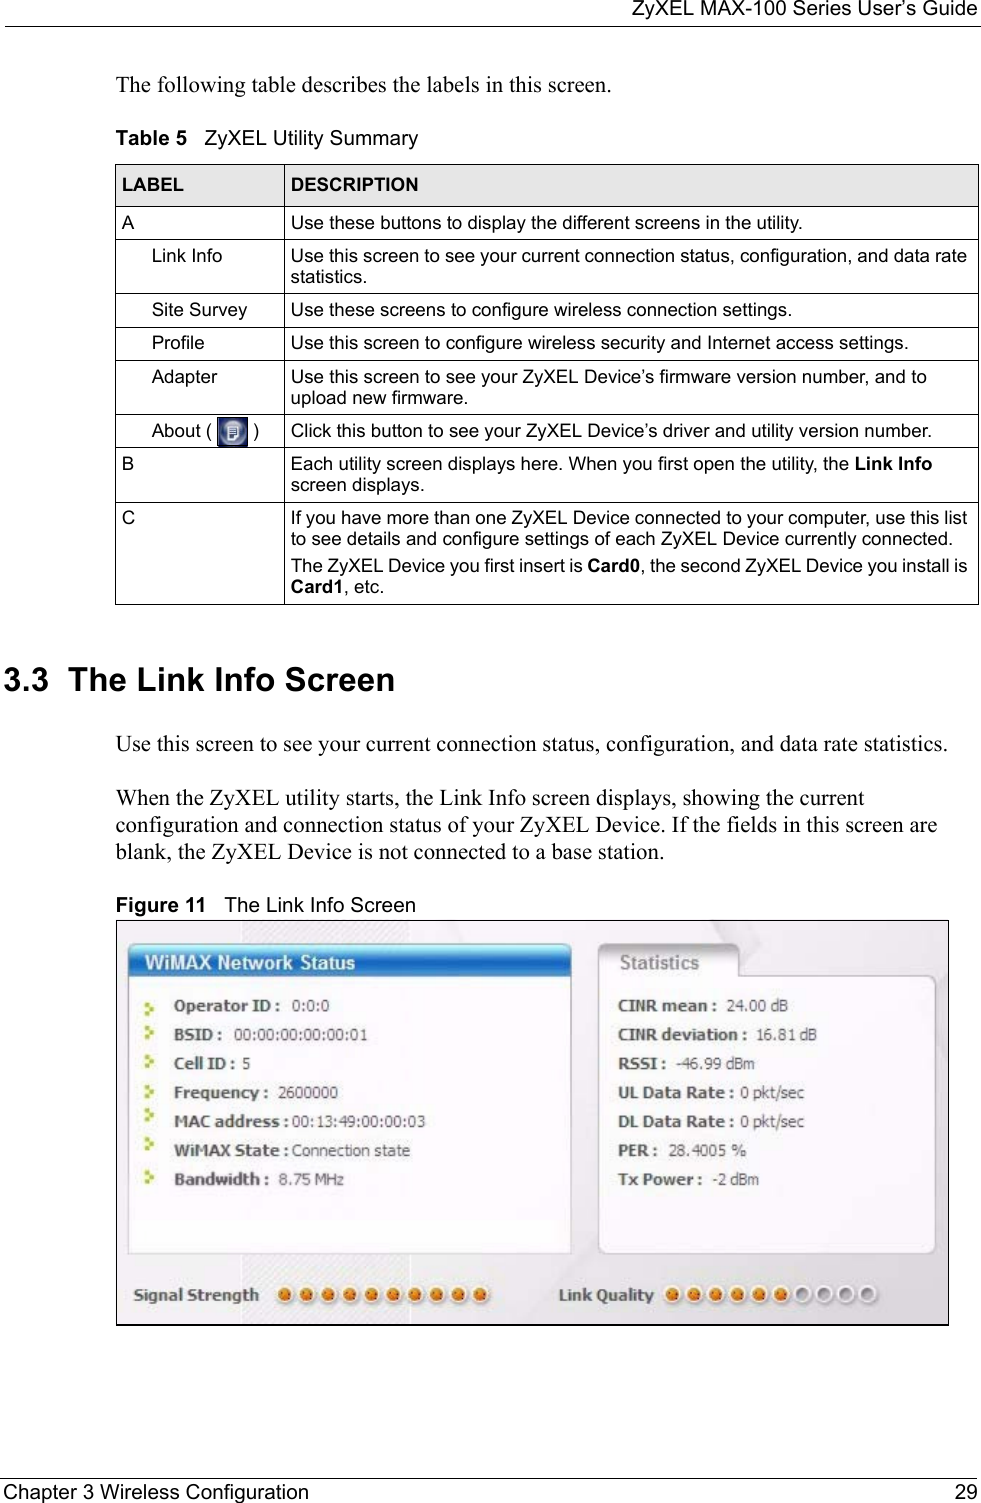 ZyXEL MAX-100 Series User’s GuideChapter 3 Wireless Configuration 29The following table describes the labels in this screen. 3.3  The Link Info Screen Use this screen to see your current connection status, configuration, and data rate statistics.When the ZyXEL utility starts, the Link Info screen displays, showing the current configuration and connection status of your ZyXEL Device. If the fields in this screen are blank, the ZyXEL Device is not connected to a base station.Figure 11   The Link Info ScreenTable 5   ZyXEL Utility SummaryLABEL DESCRIPTIONA Use these buttons to display the different screens in the utility.Link Info Use this screen to see your current connection status, configuration, and data rate statistics.Site Survey Use these screens to configure wireless connection settings.Profile Use this screen to configure wireless security and Internet access settings.Adapter Use this screen to see your ZyXEL Device’s firmware version number, and to upload new firmware.About (   ) Click this button to see your ZyXEL Device’s driver and utility version number. B Each utility screen displays here. When you first open the utility, the Link Info screen displays.C If you have more than one ZyXEL Device connected to your computer, use this list to see details and configure settings of each ZyXEL Device currently connected.The ZyXEL Device you first insert is Card0, the second ZyXEL Device you install is Card1, etc.